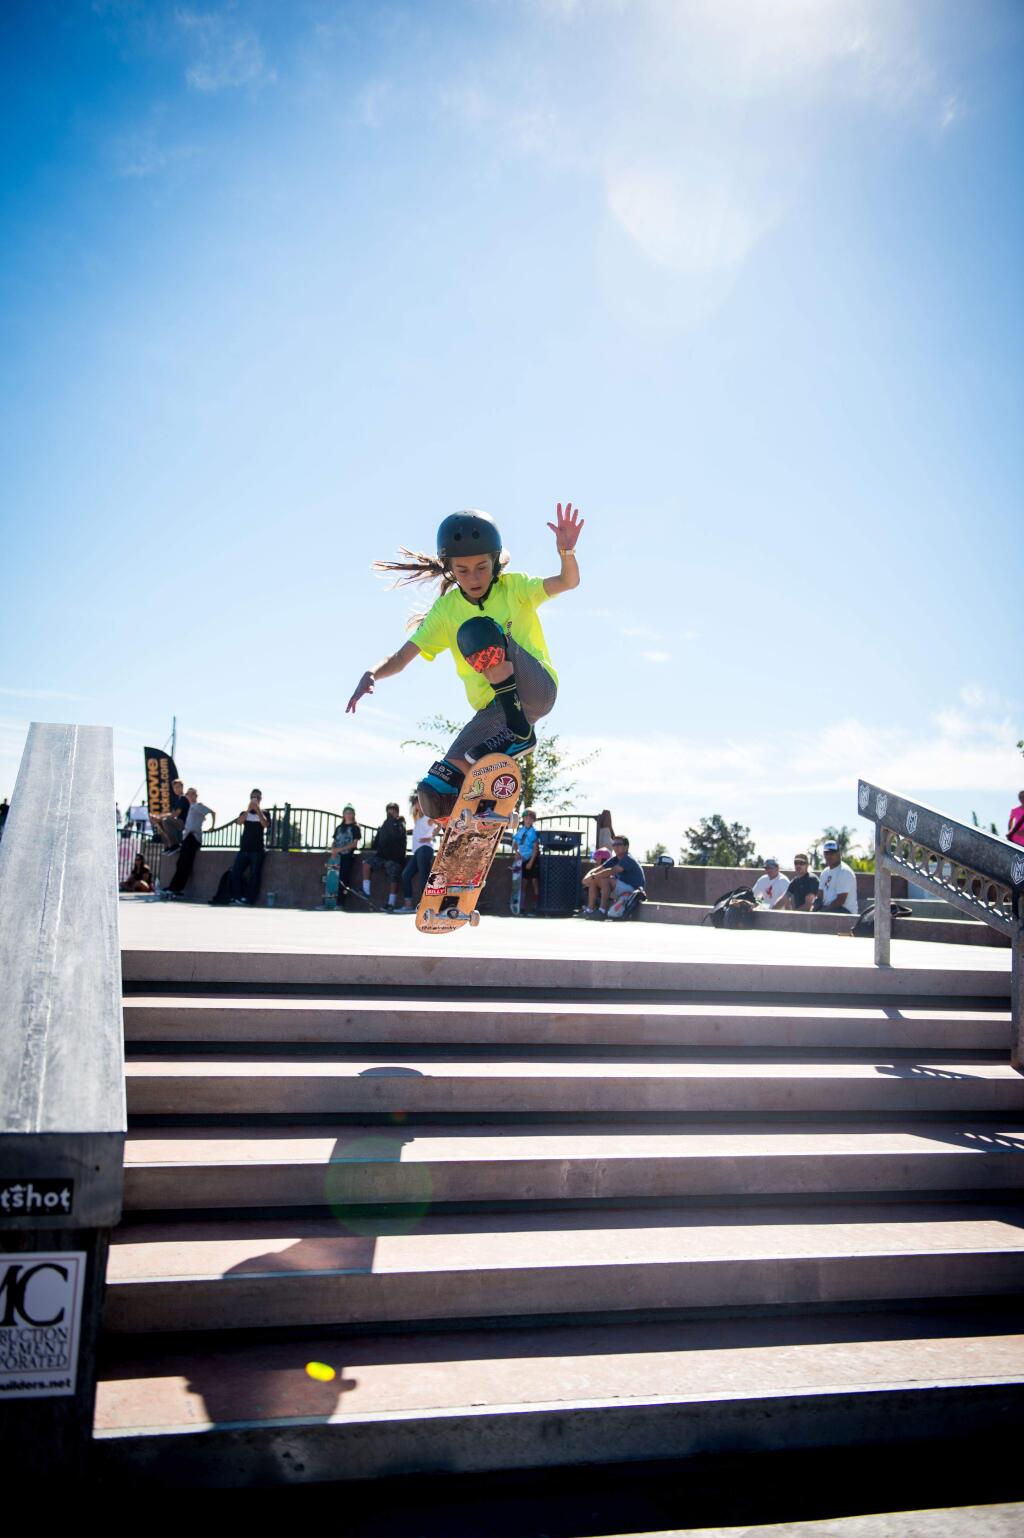 Petaluma 11-year-old Minna Stess skates at the Exposure Skate Contest in Encinitas. Stess is the youngest competitor invited to the X Games qualifier. Photo by Ian Logan from the book “It's Not About Pretty”